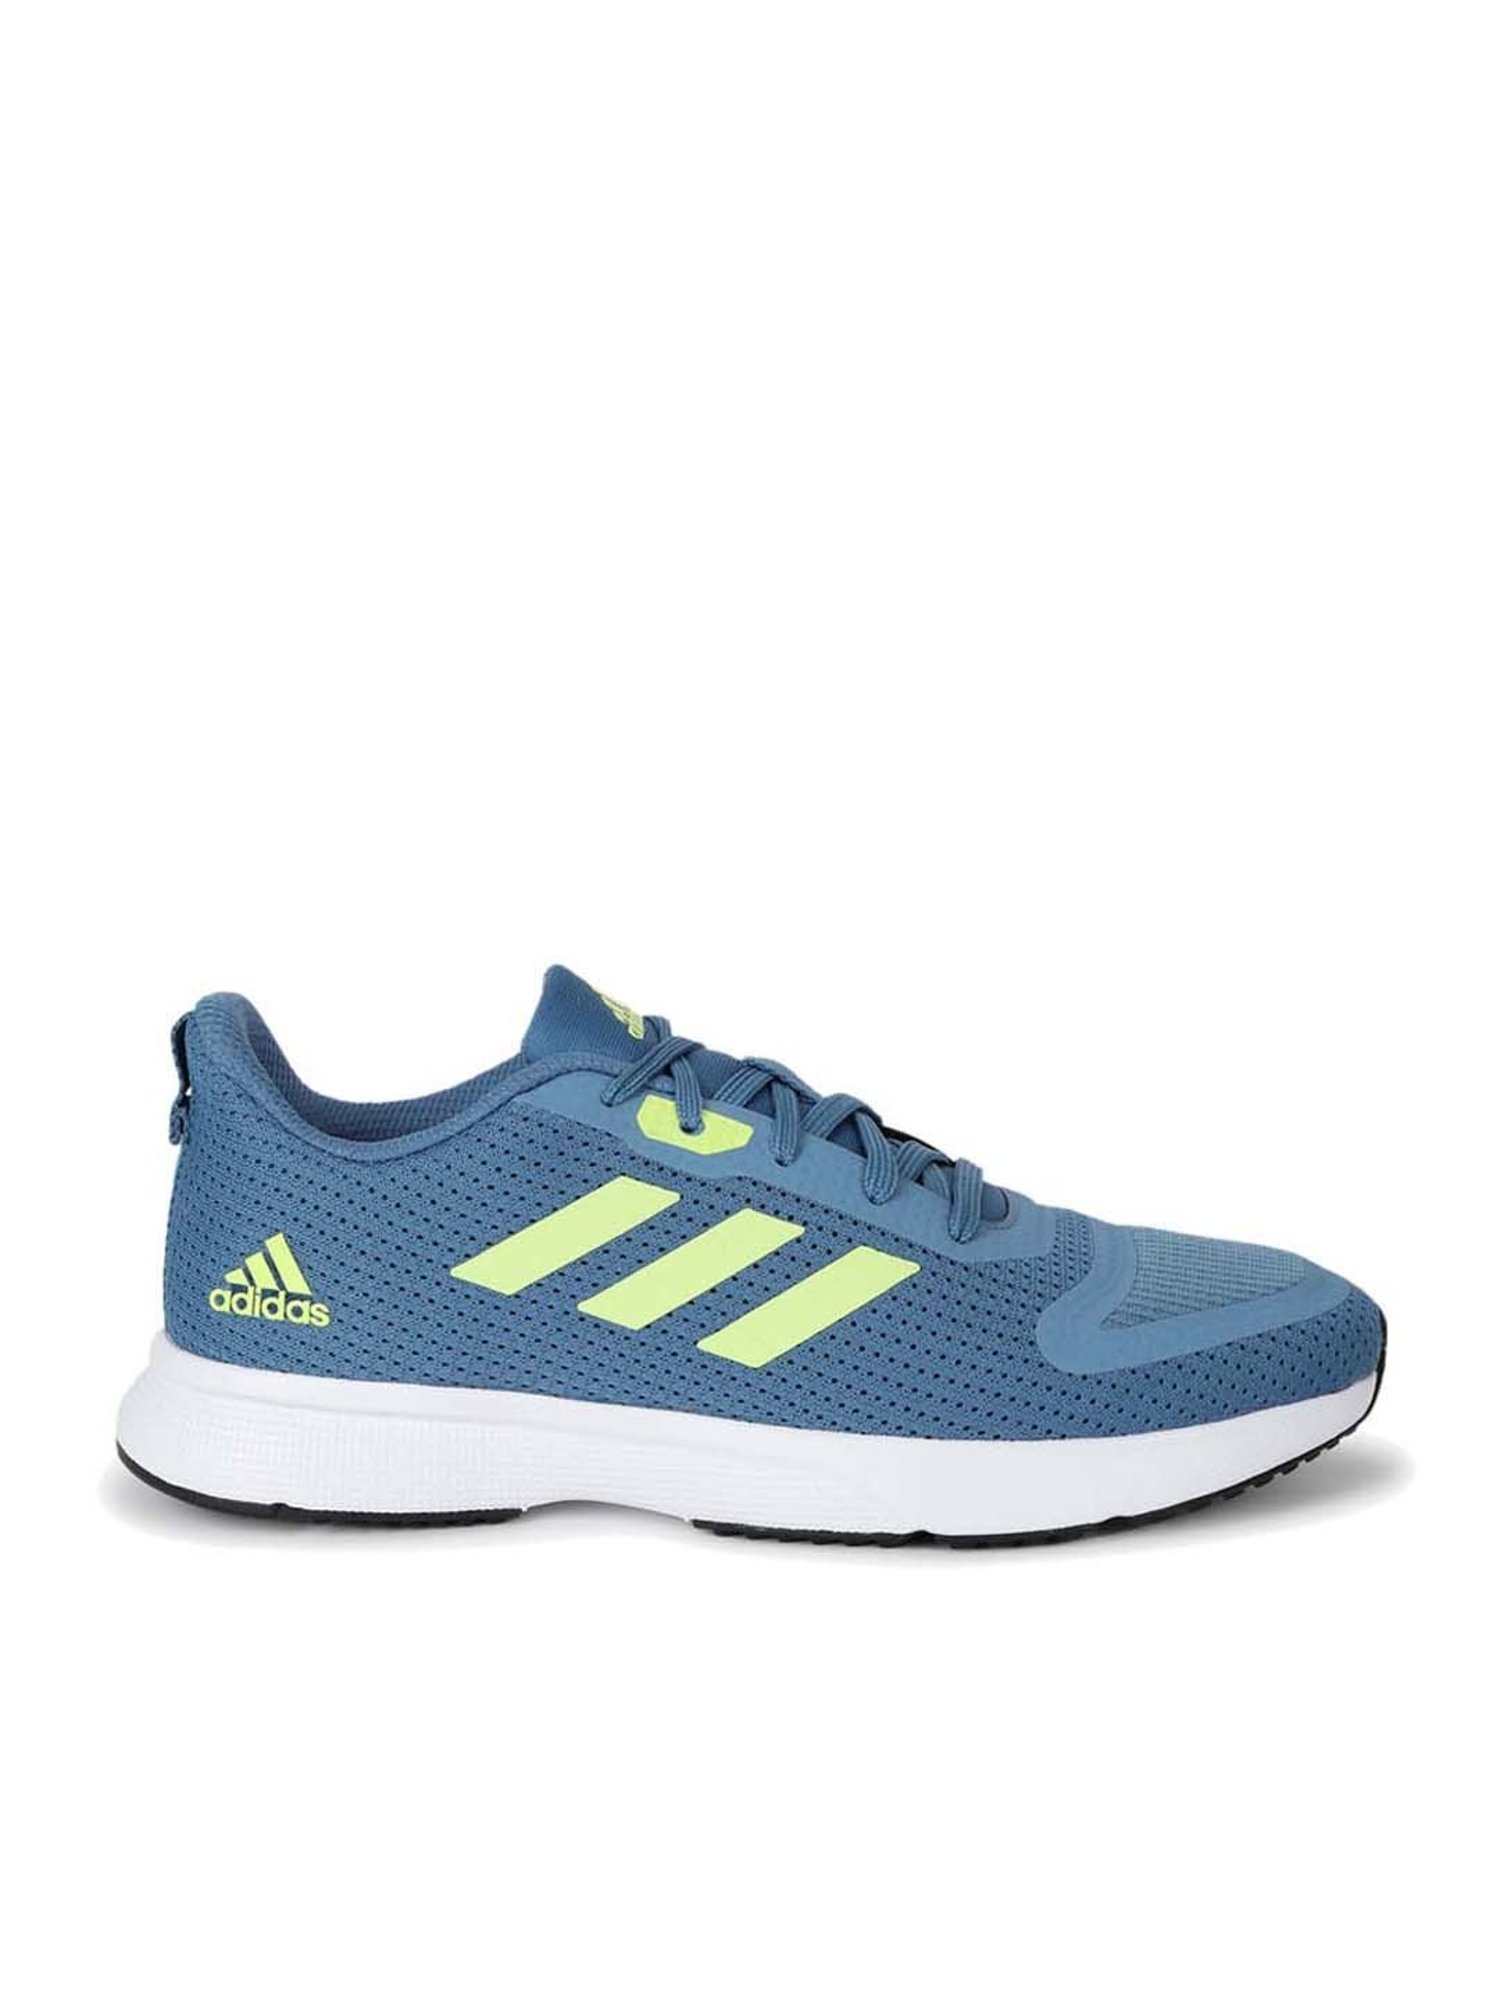 Buy Adidas Men's Jaysaw Reflective M Blue Running Shoes for Men at 